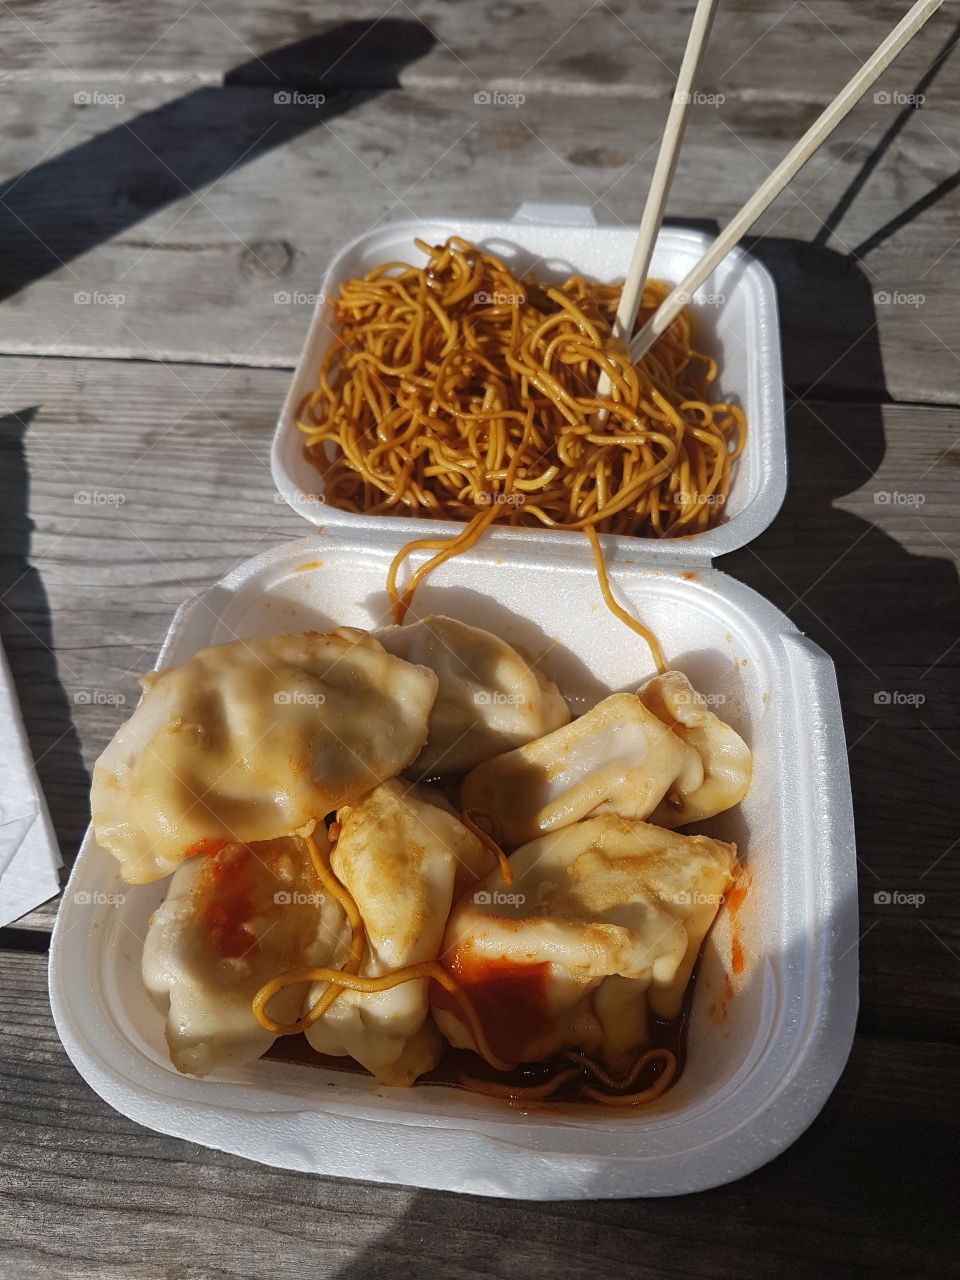 pot stickers and noodles